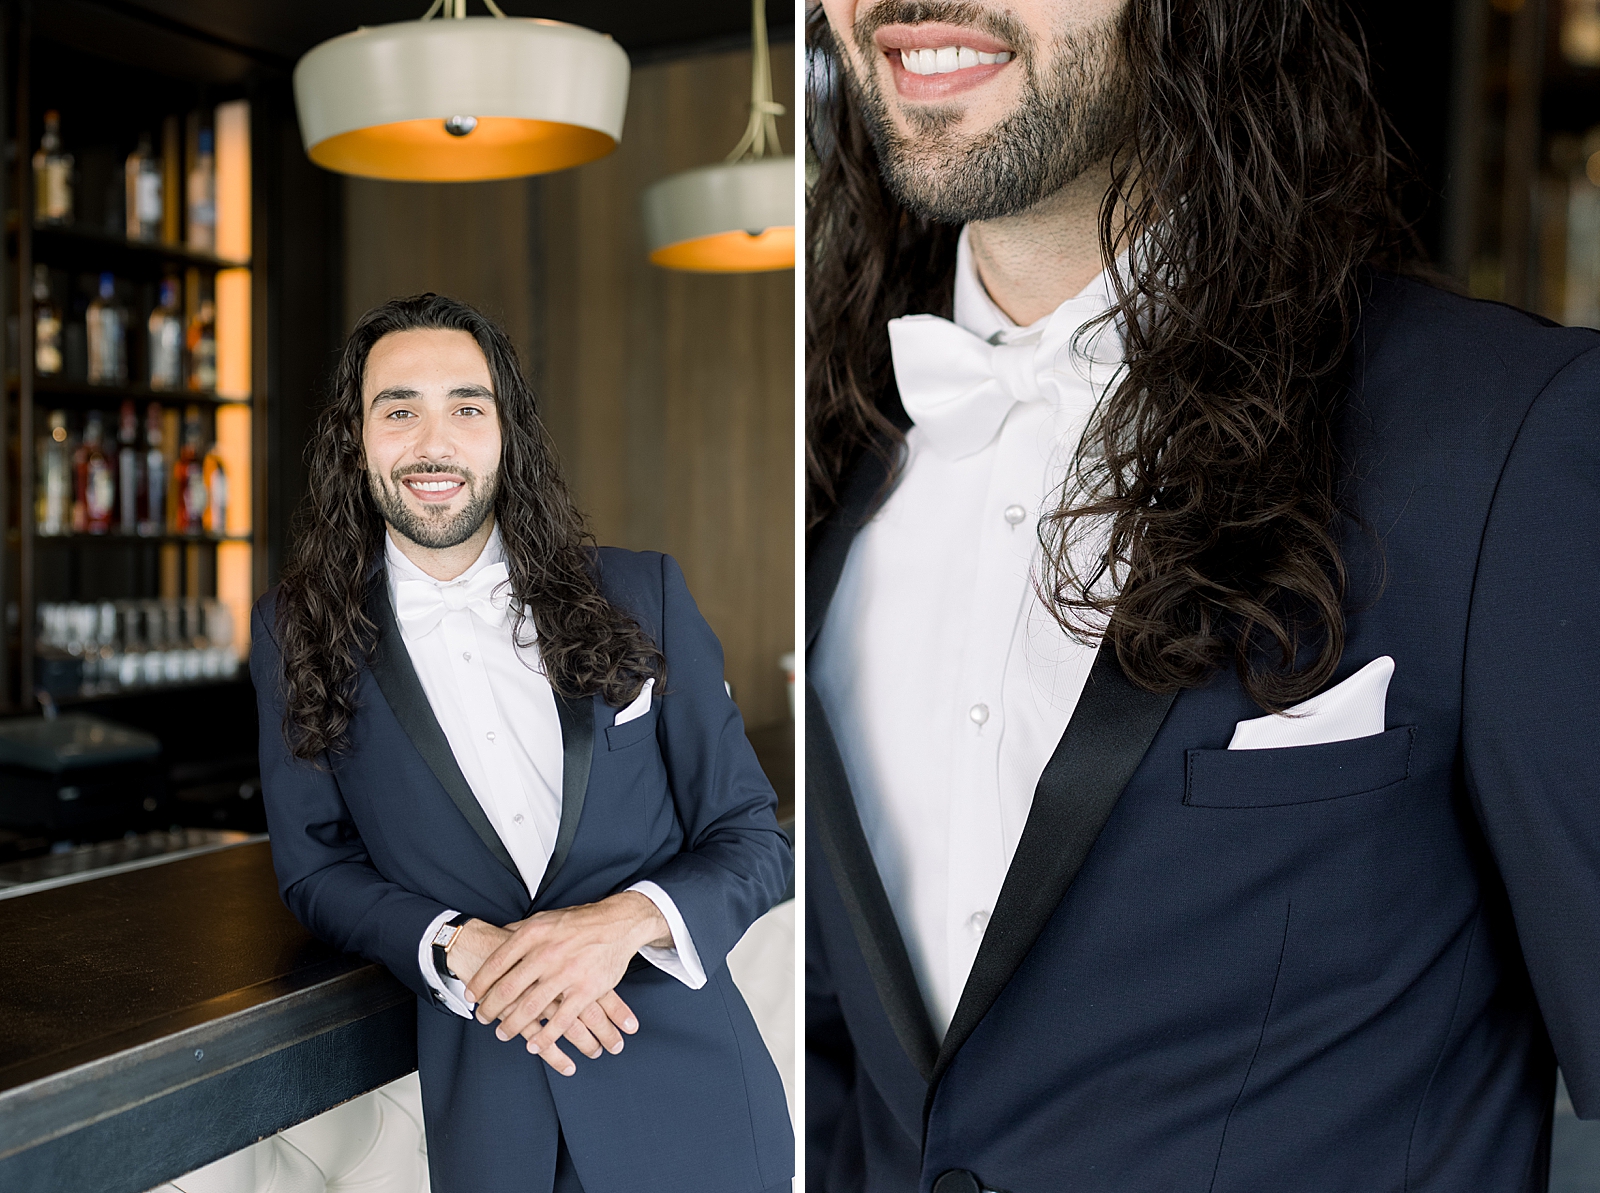 Groom in suit after getting ready leaning on bar